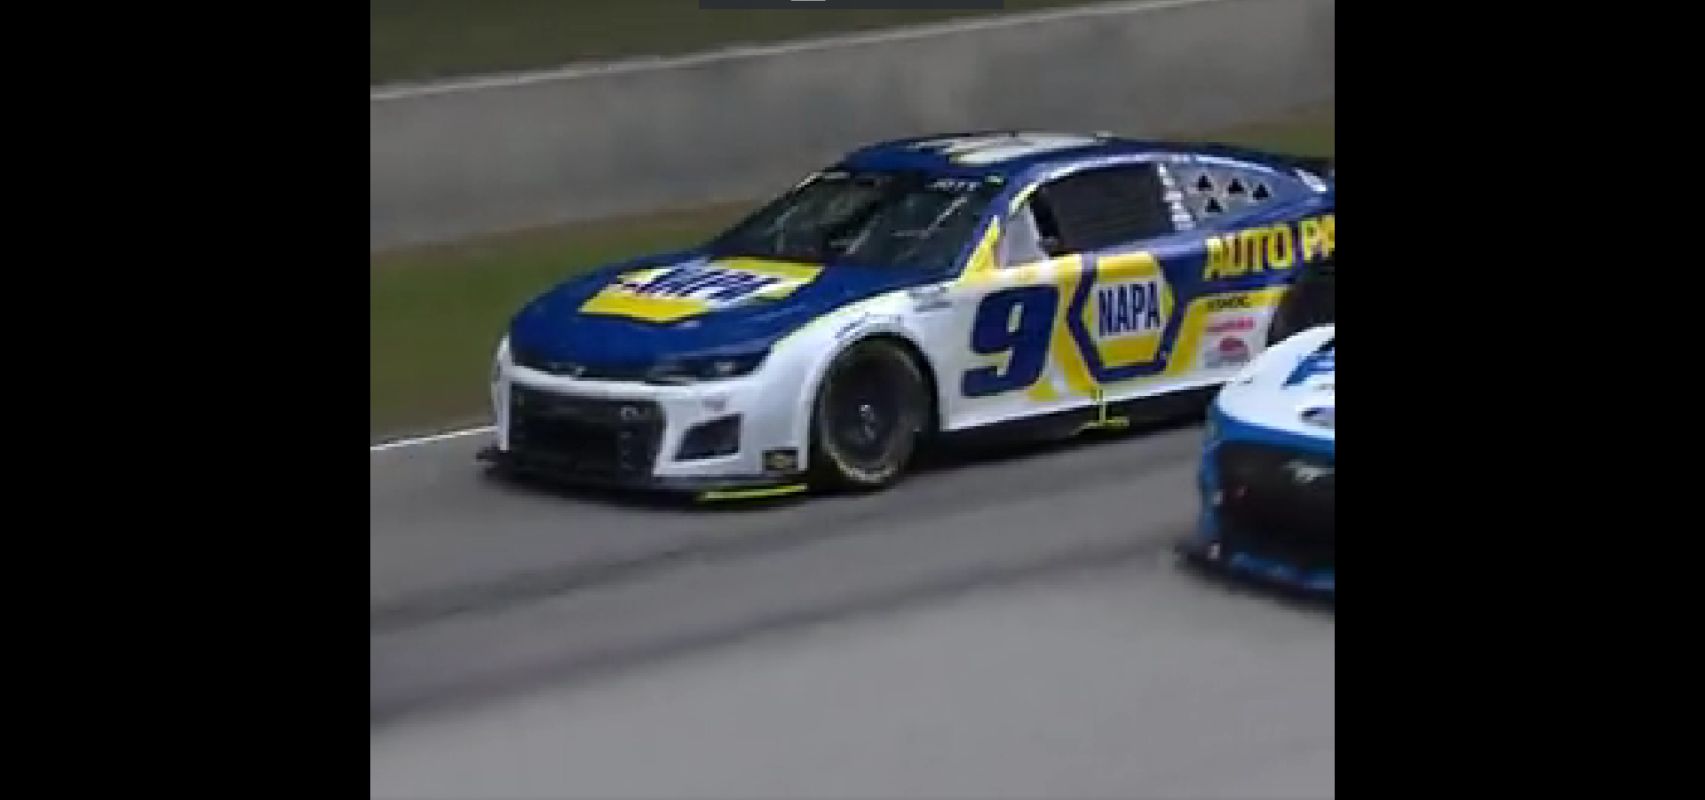 <br />
#9 car looks like it is having some problems on the pace laps.